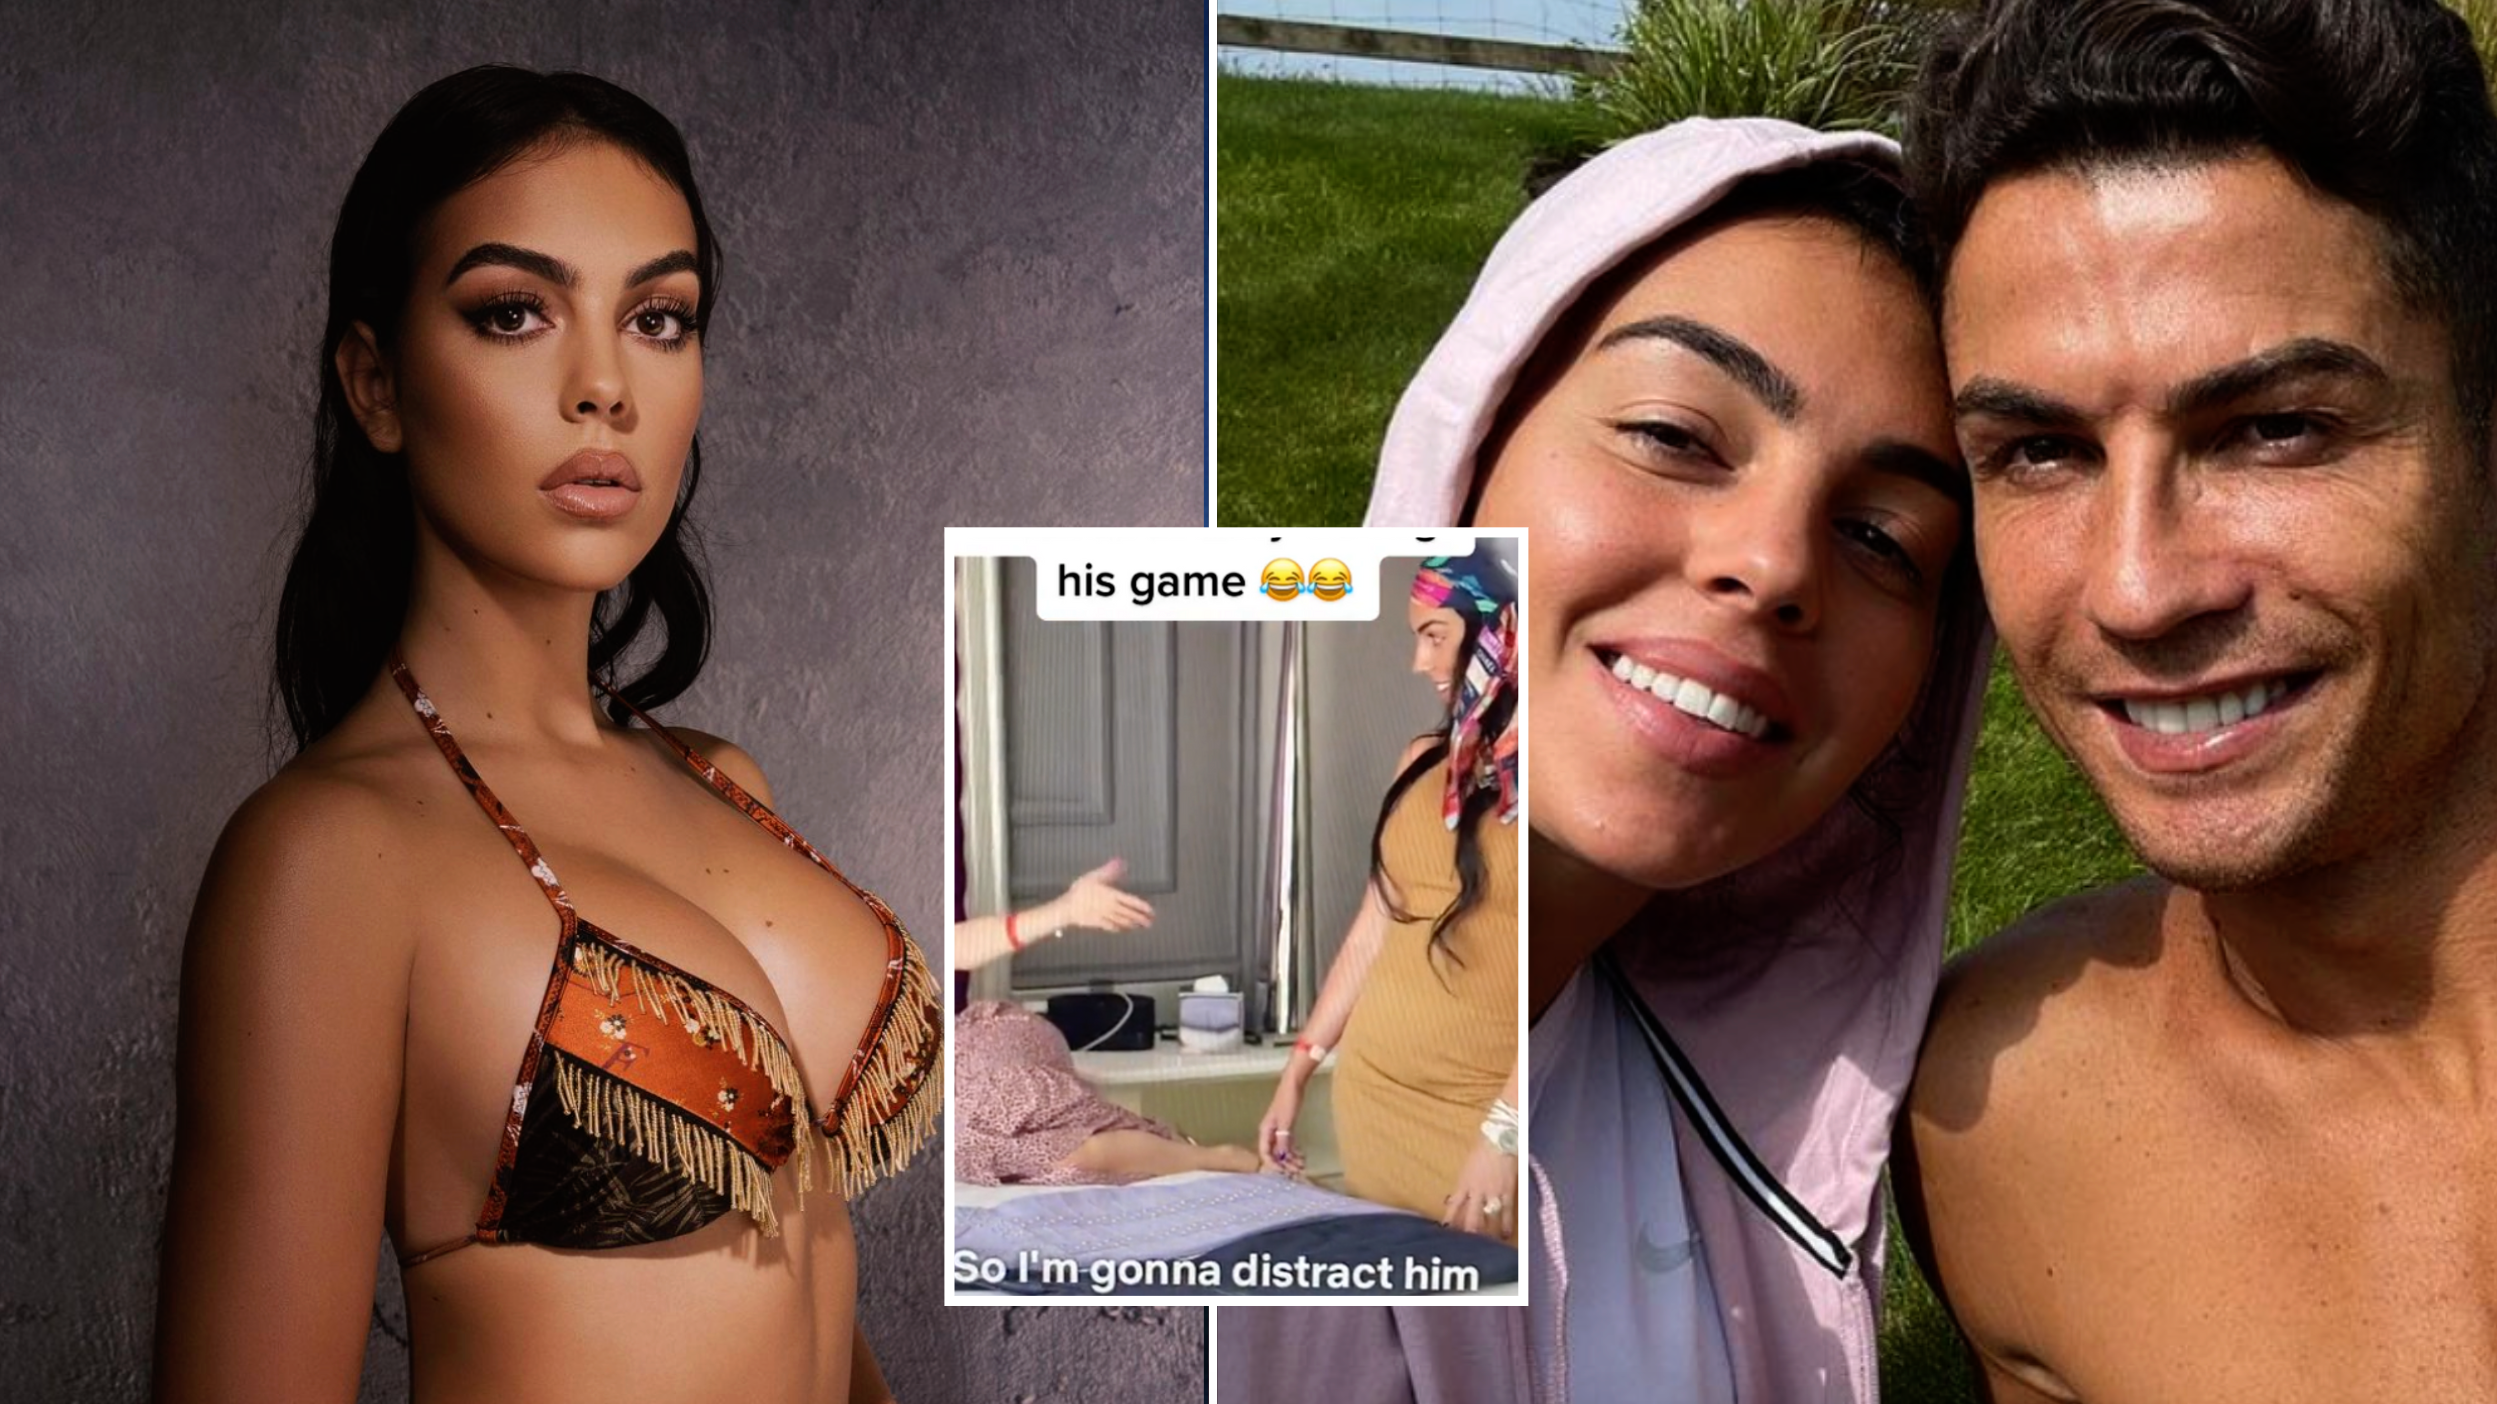 85+ Hot Pictures Of Georgina Rodriguez Are Too Damn Appealing – The Viraler